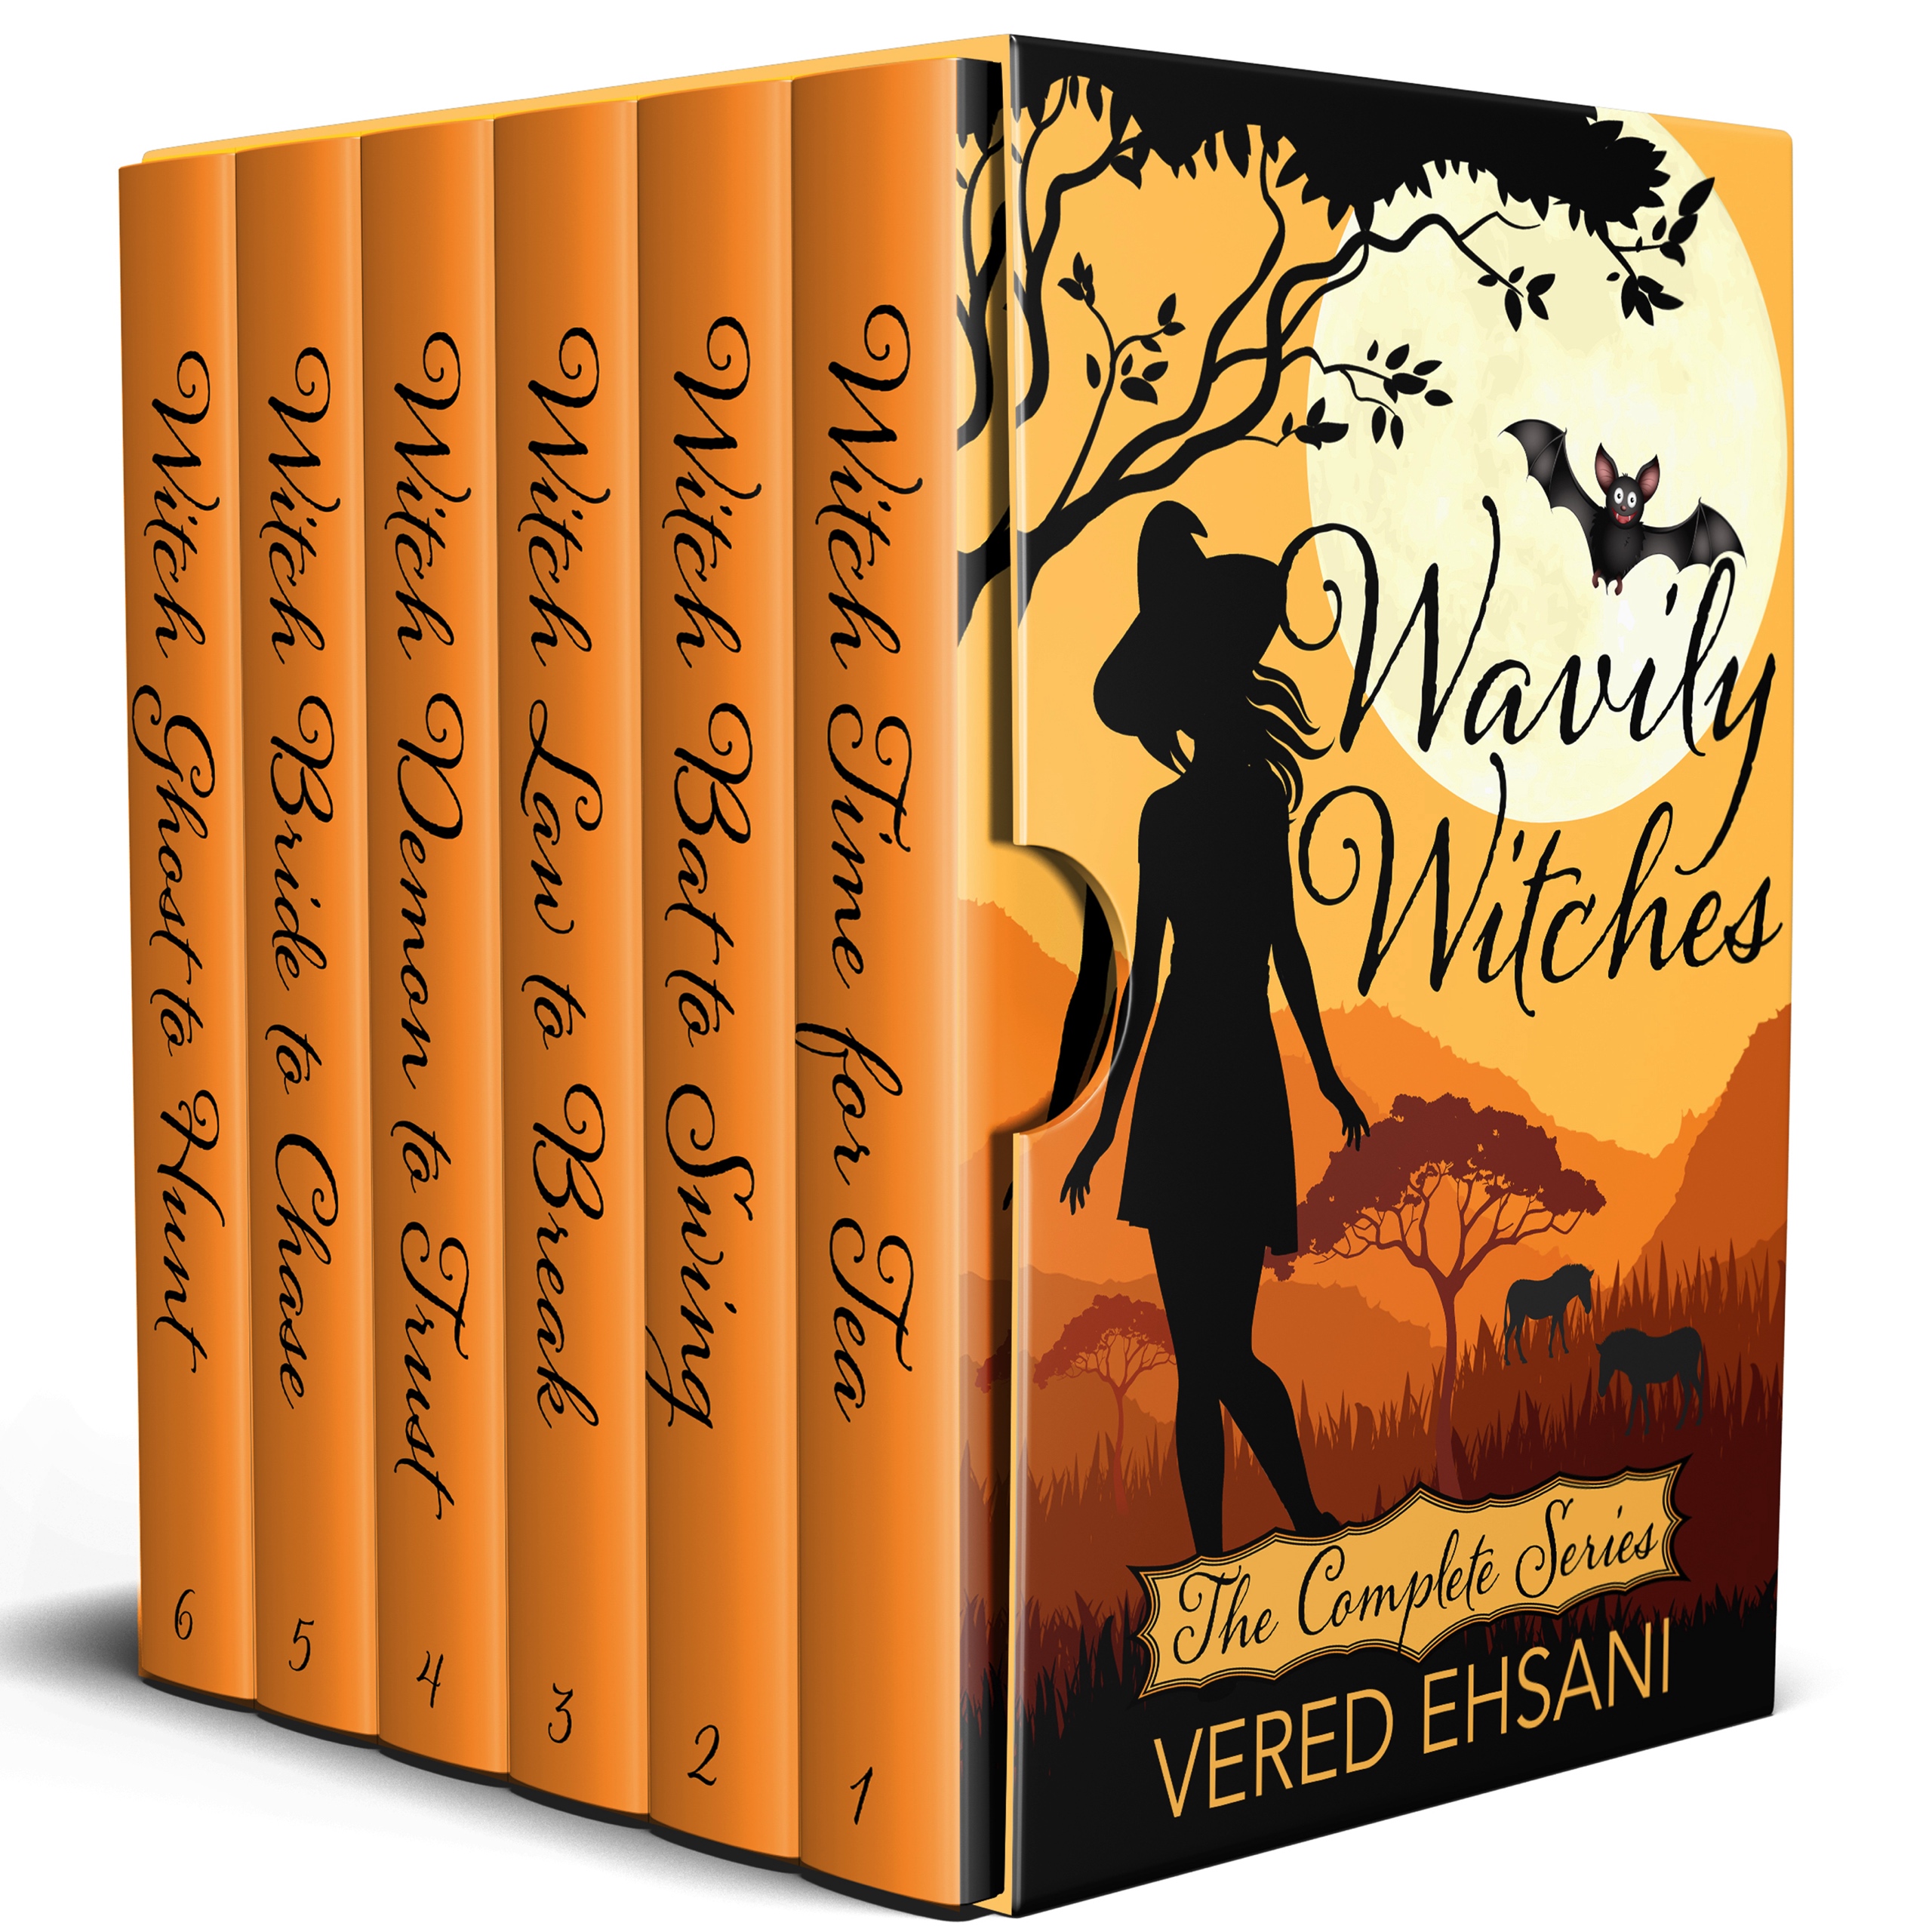 FREE: Wavily Witches: The Complete Series by Vered Ehsani